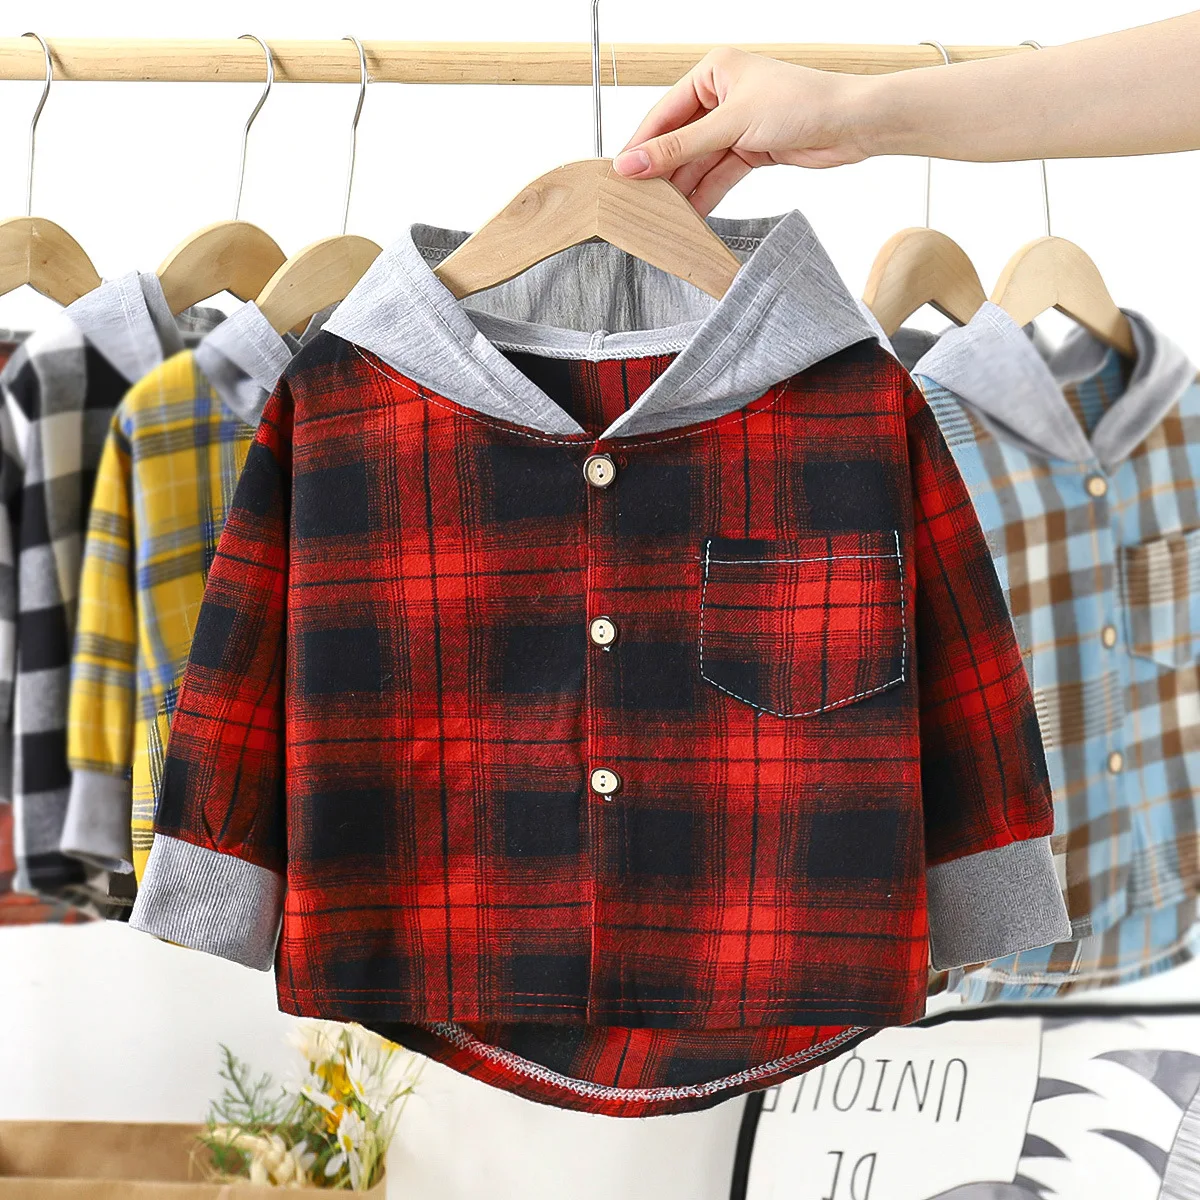 Children-s-Hooded-Shirts-Kids-Clothes-Baby-Boys-Plaid-Shirts-Coat-for ...